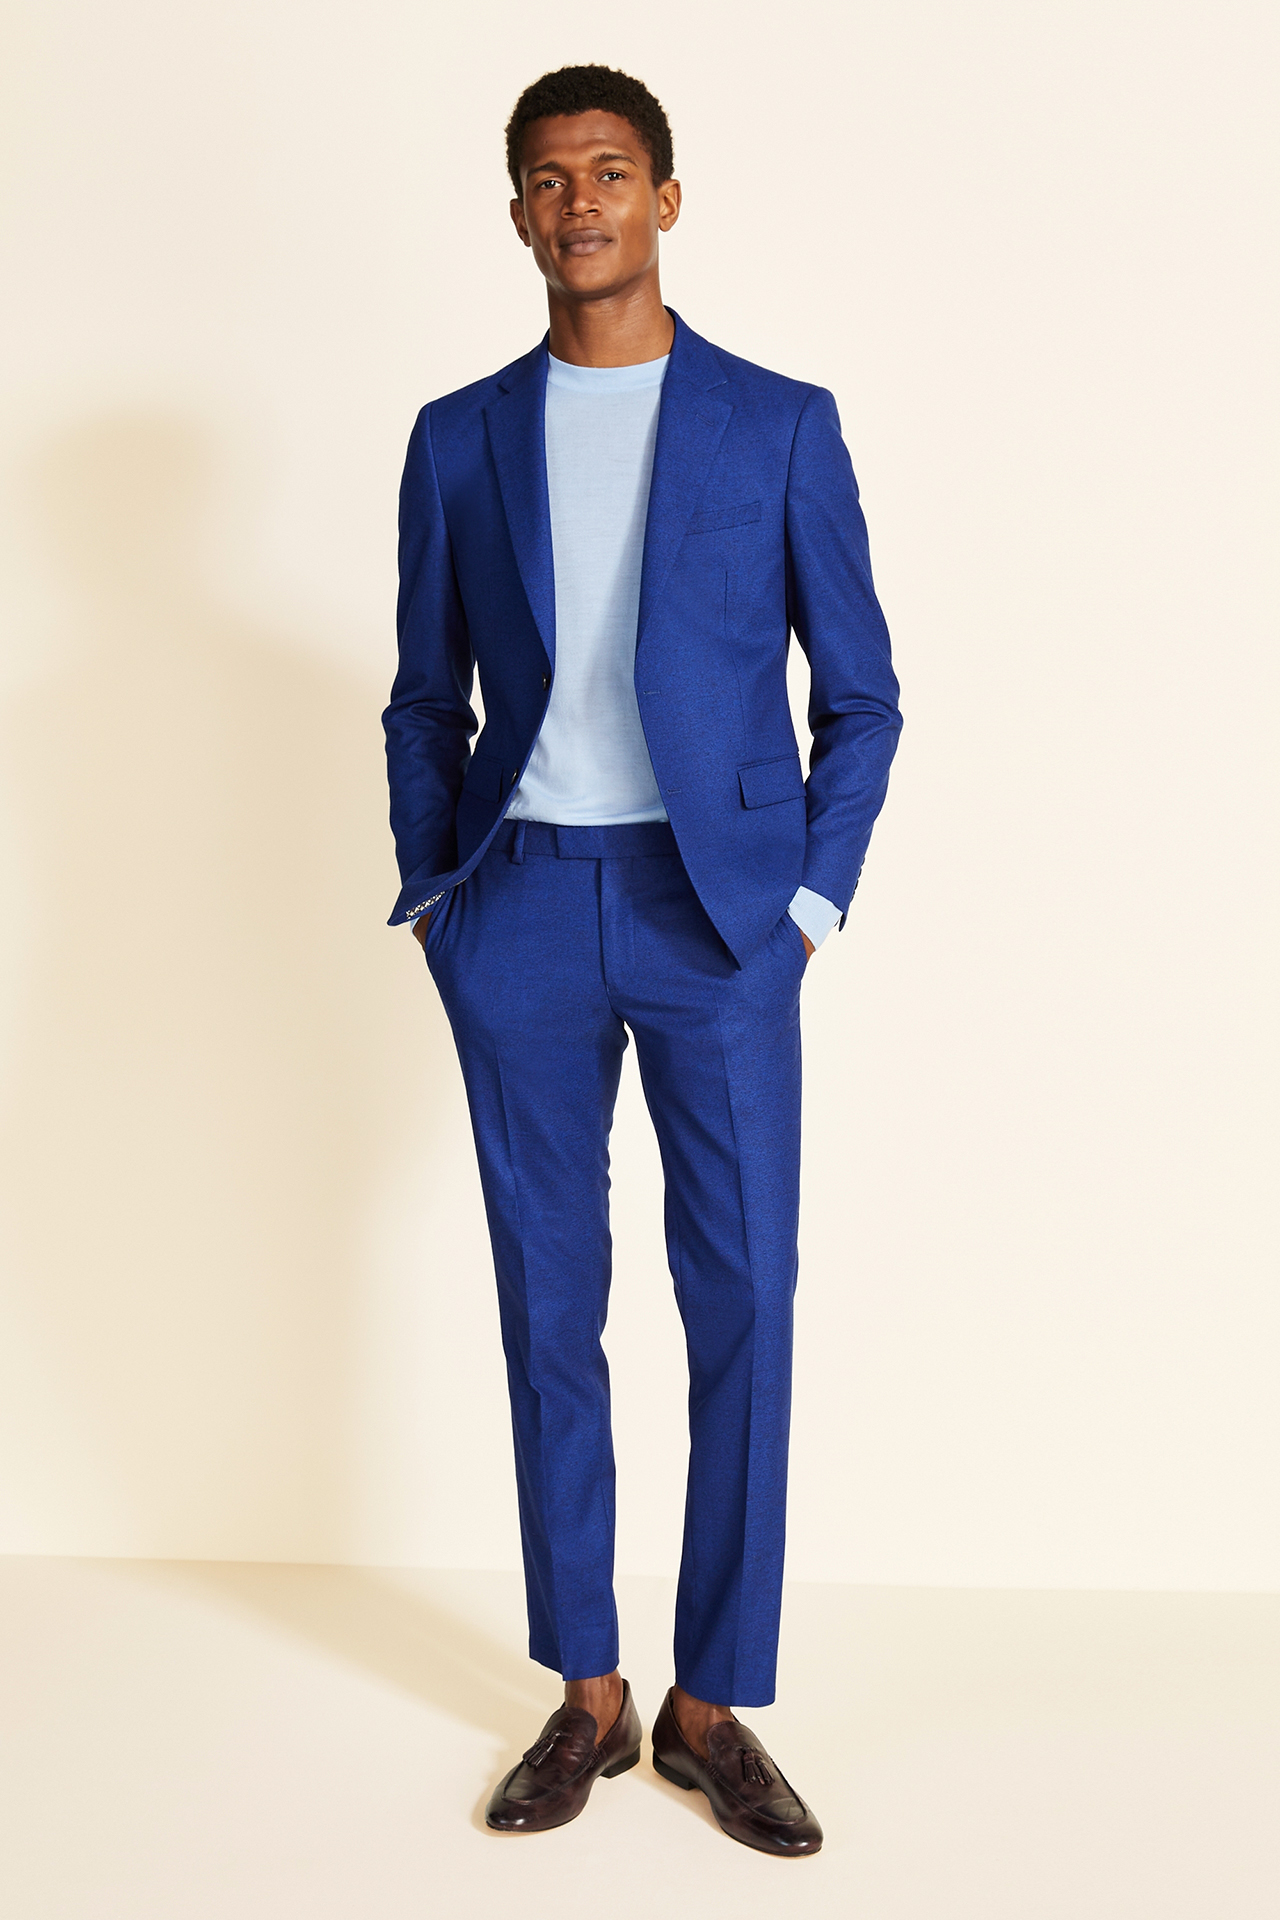 blue suit, light blue t-shirt, and brown loafers